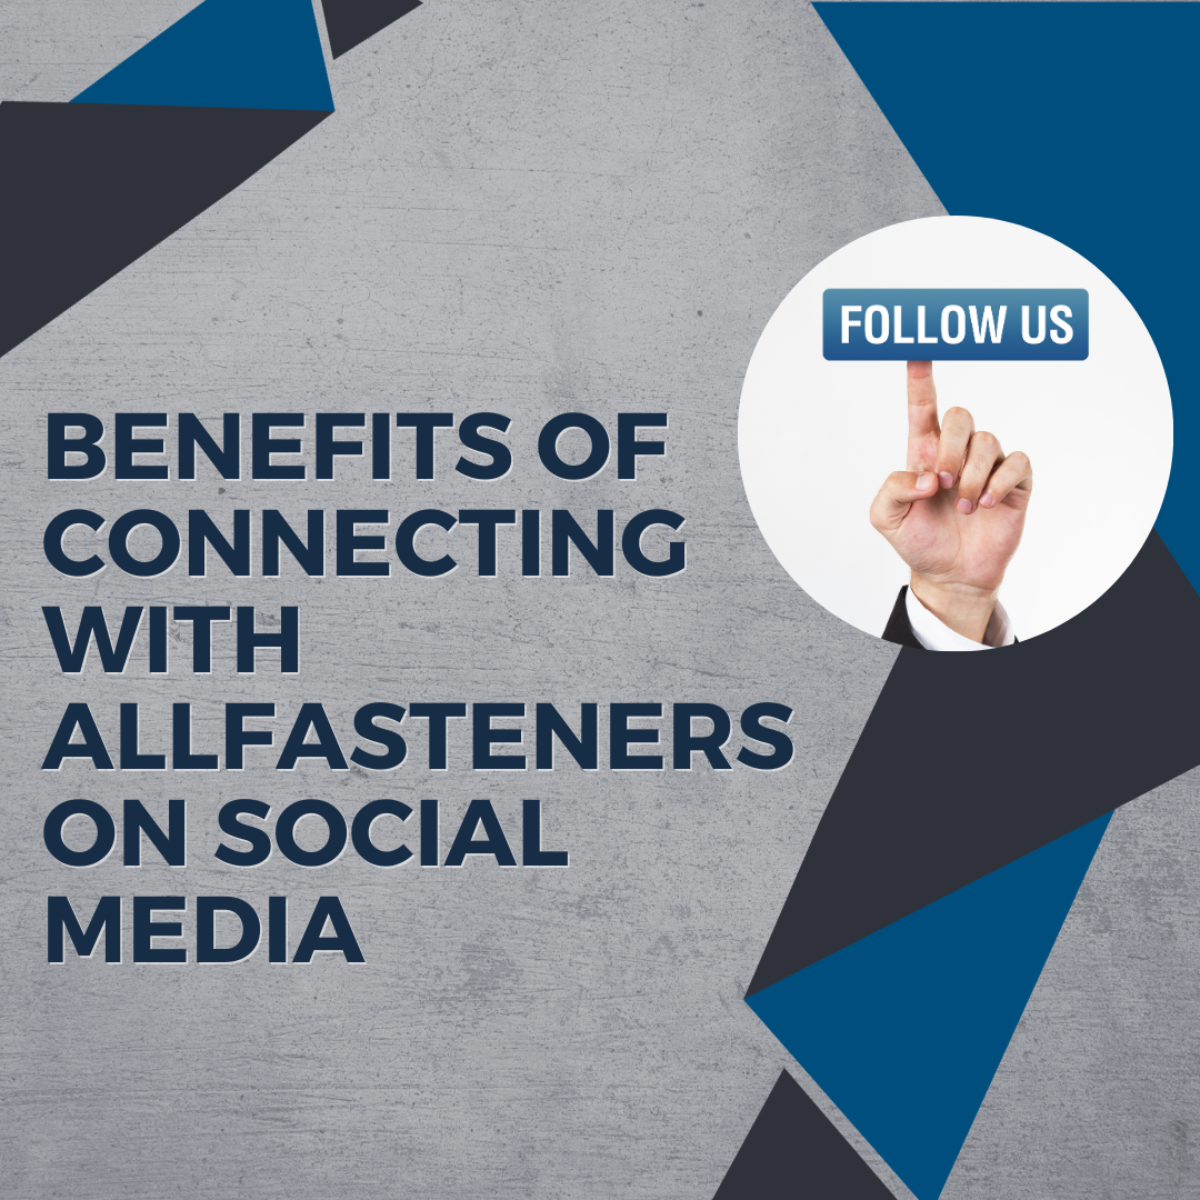 Benefits of Connecting With Us On Social Media